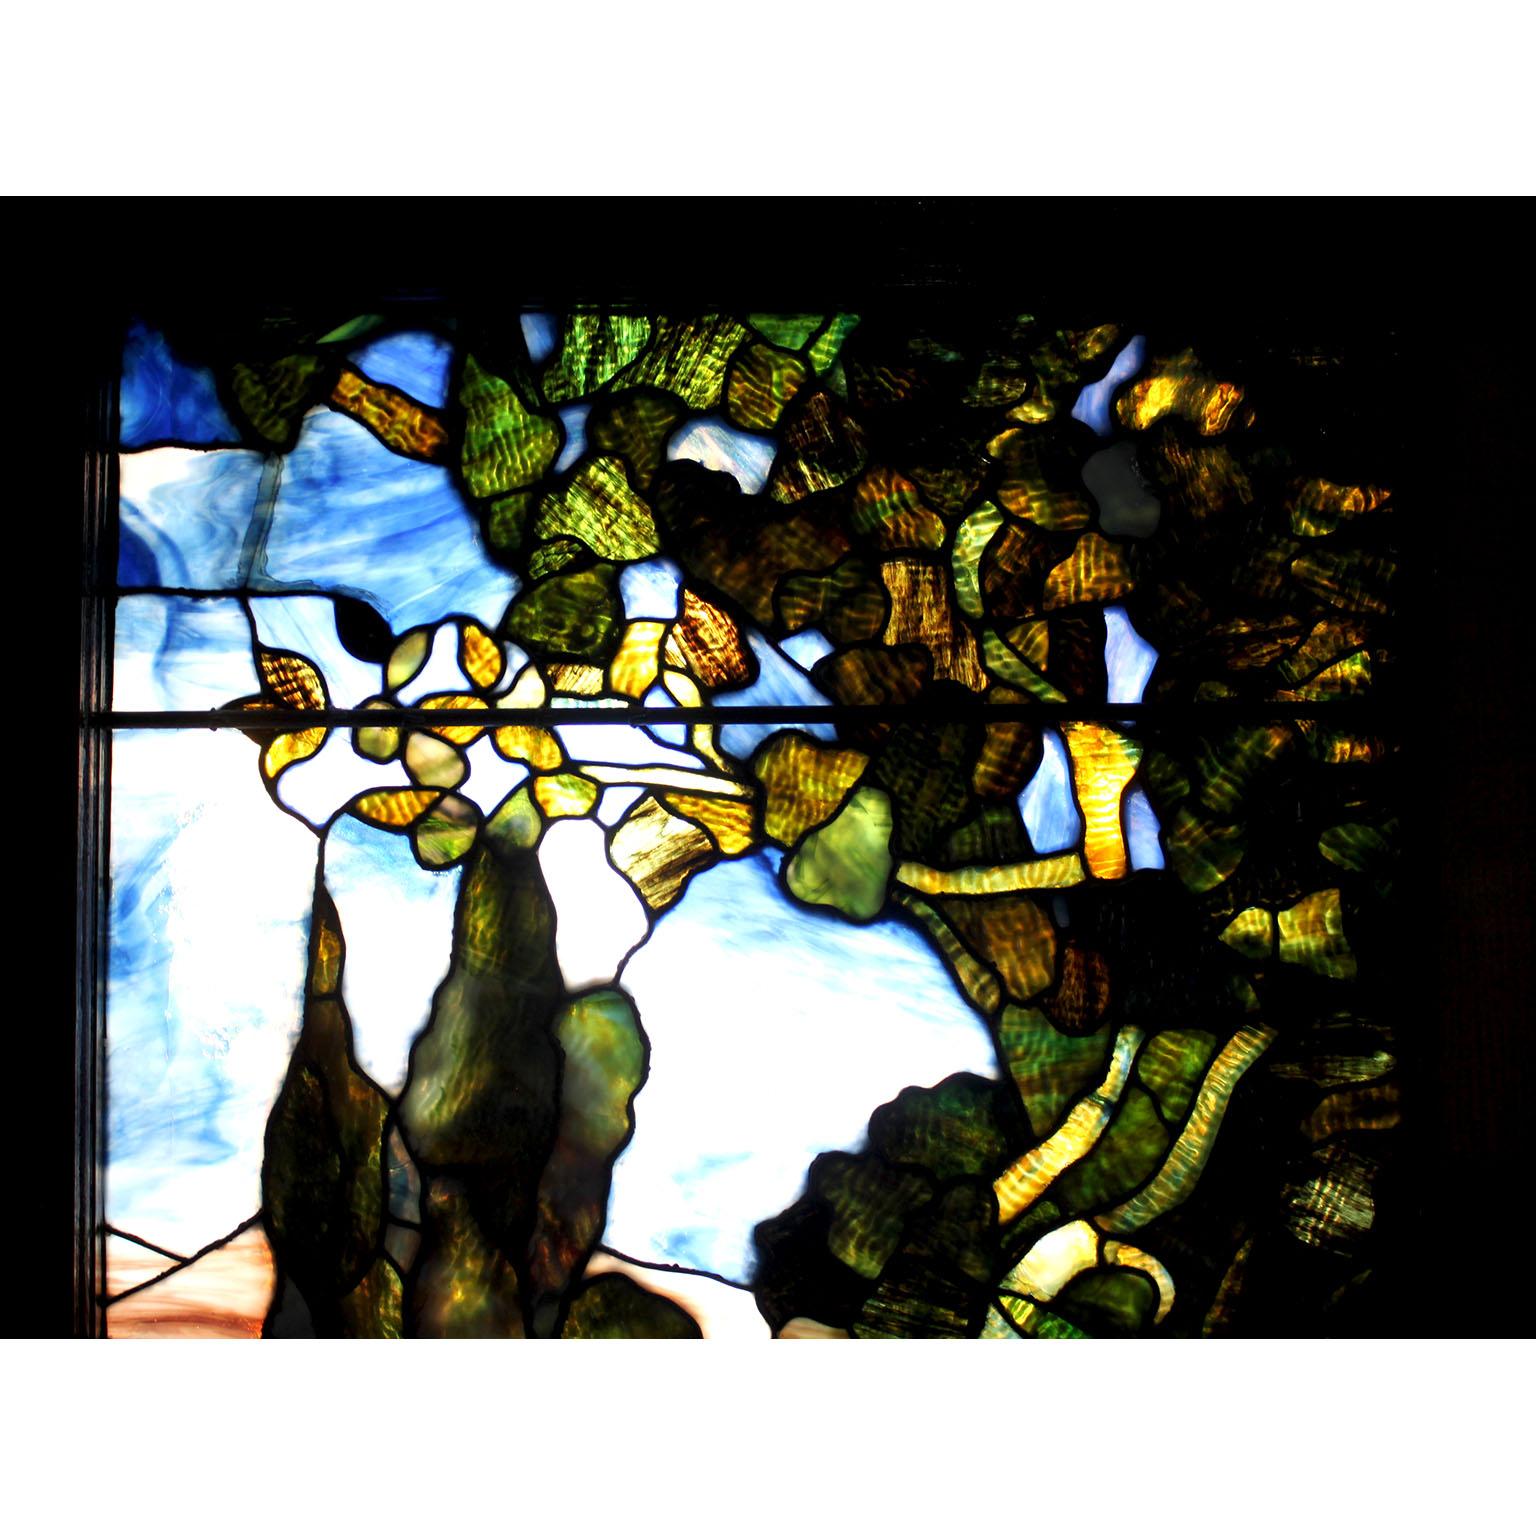 An American 19th Century Stained-Glass Panel depicting sheep/lambs amongst flowers and shrubs, in the manner Louis Comfort Tiffany - Tiffany Studios, within an oak frame. The bottom reads 